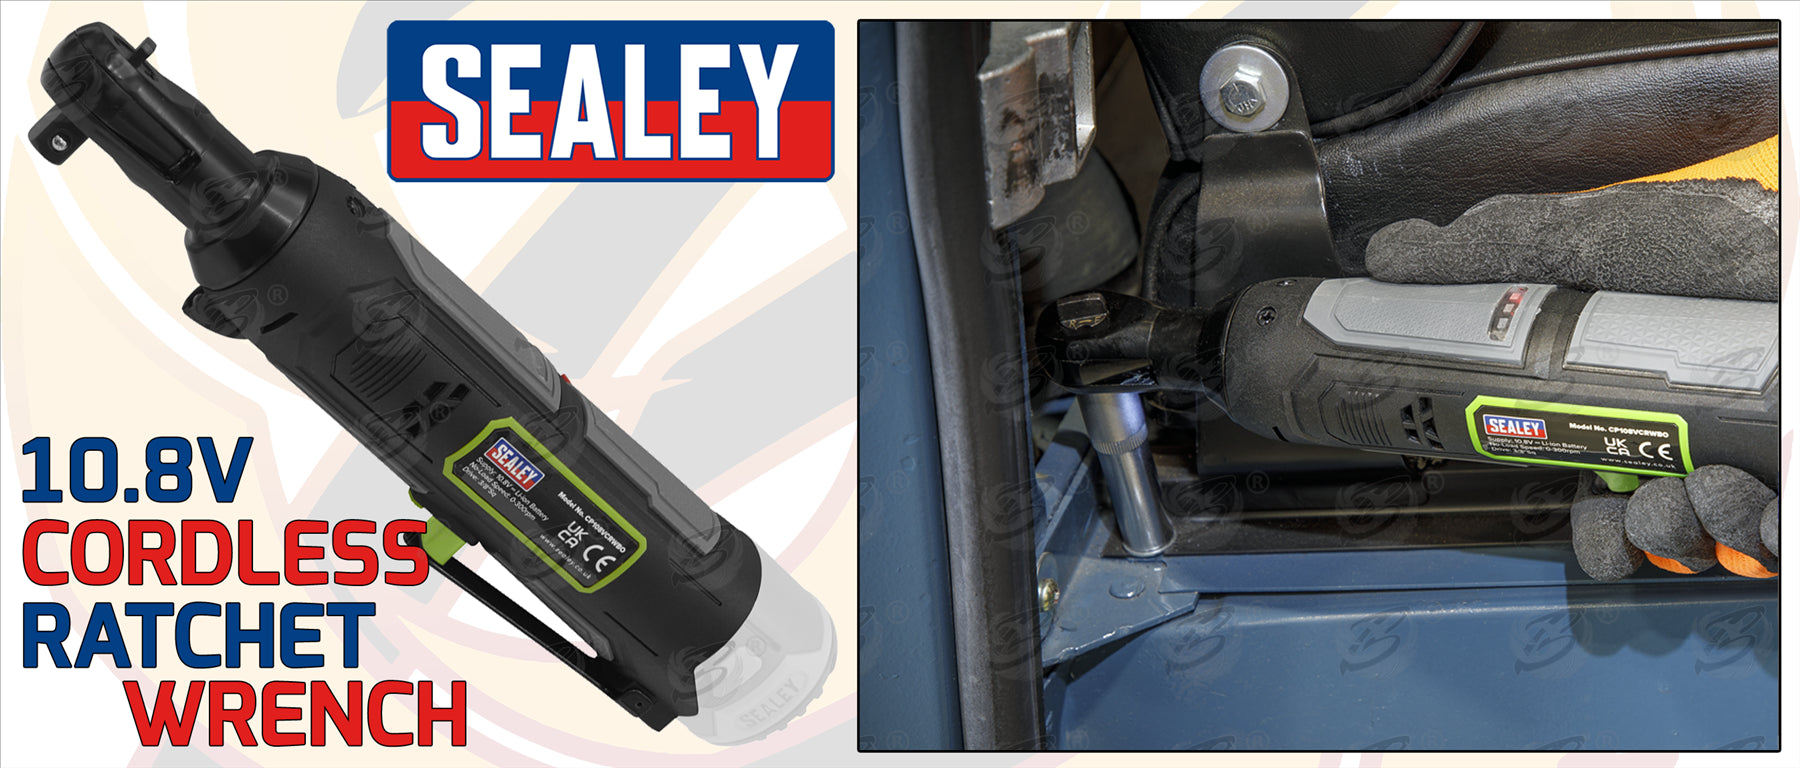 SEALEY 10.8V 3/8" DRIVE CORDLESS COMBO KIT ( DRILL - RATCHET WRENCH - IMPACT WRENCH - IMPACT DRIVER )